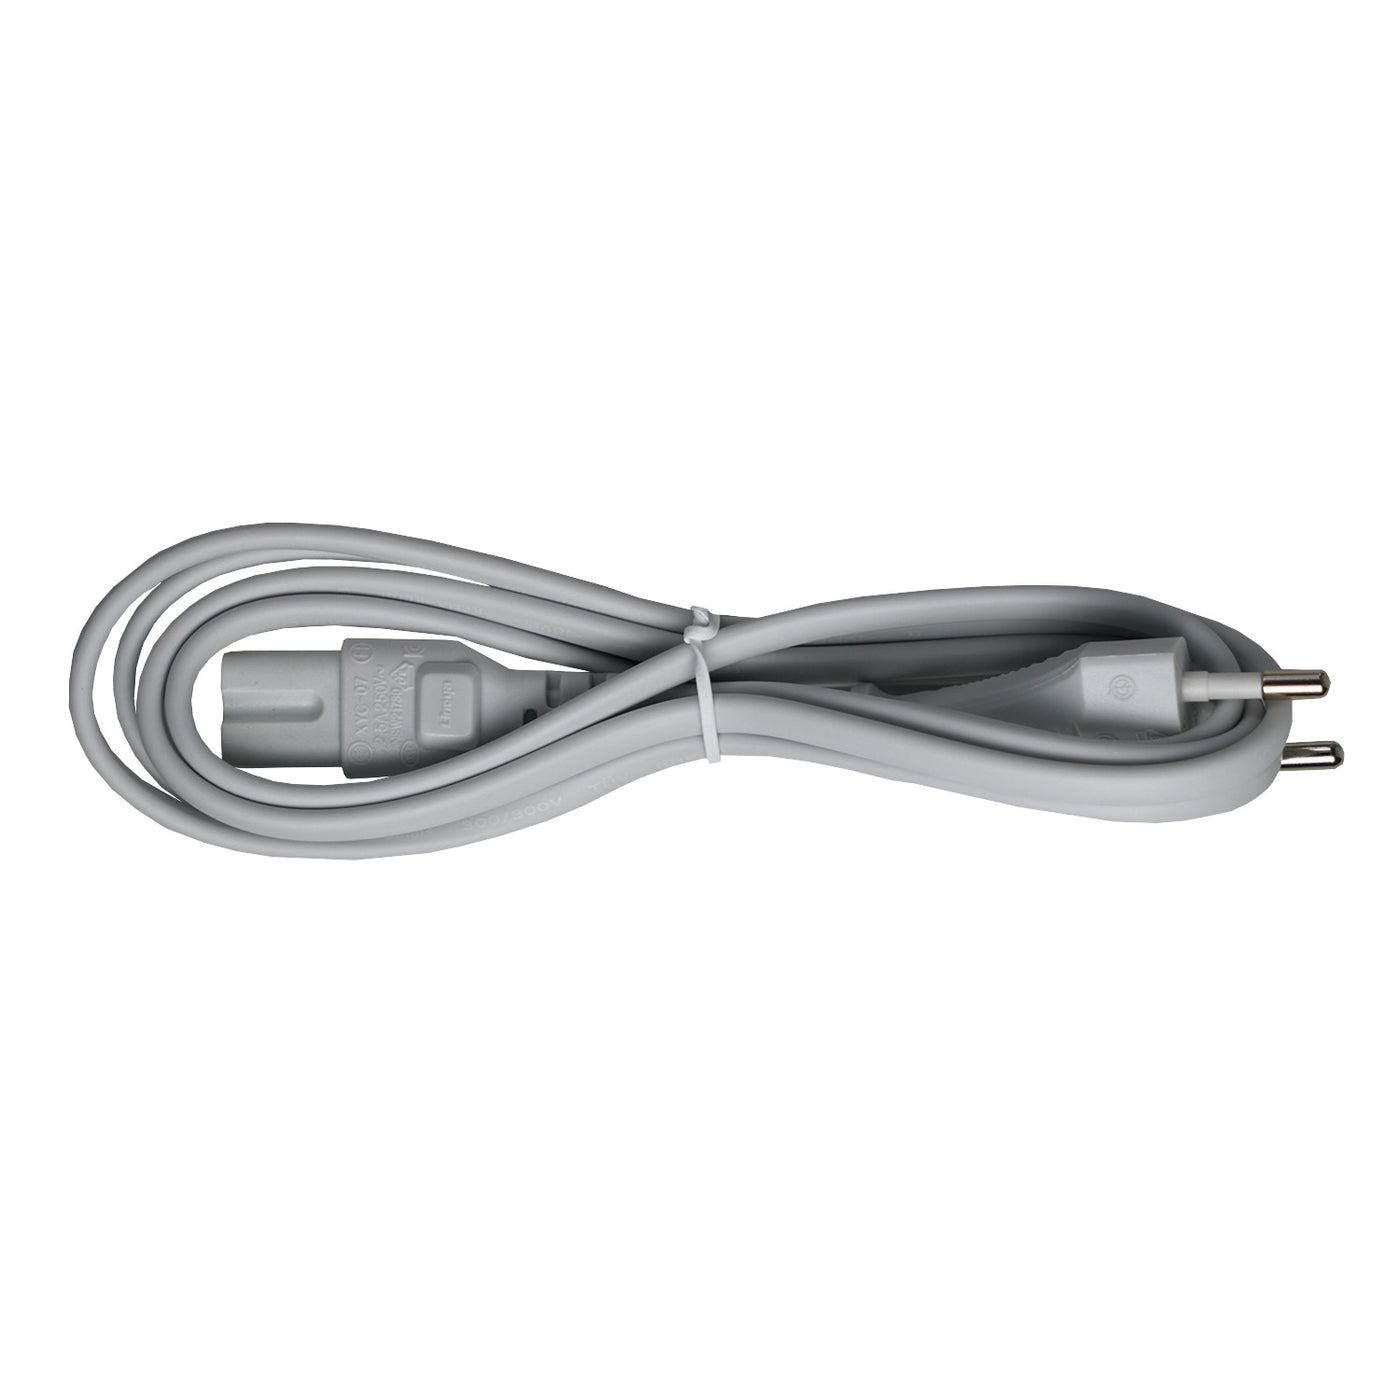 Power cord for ZACO M1S vacuuming and mopping robot